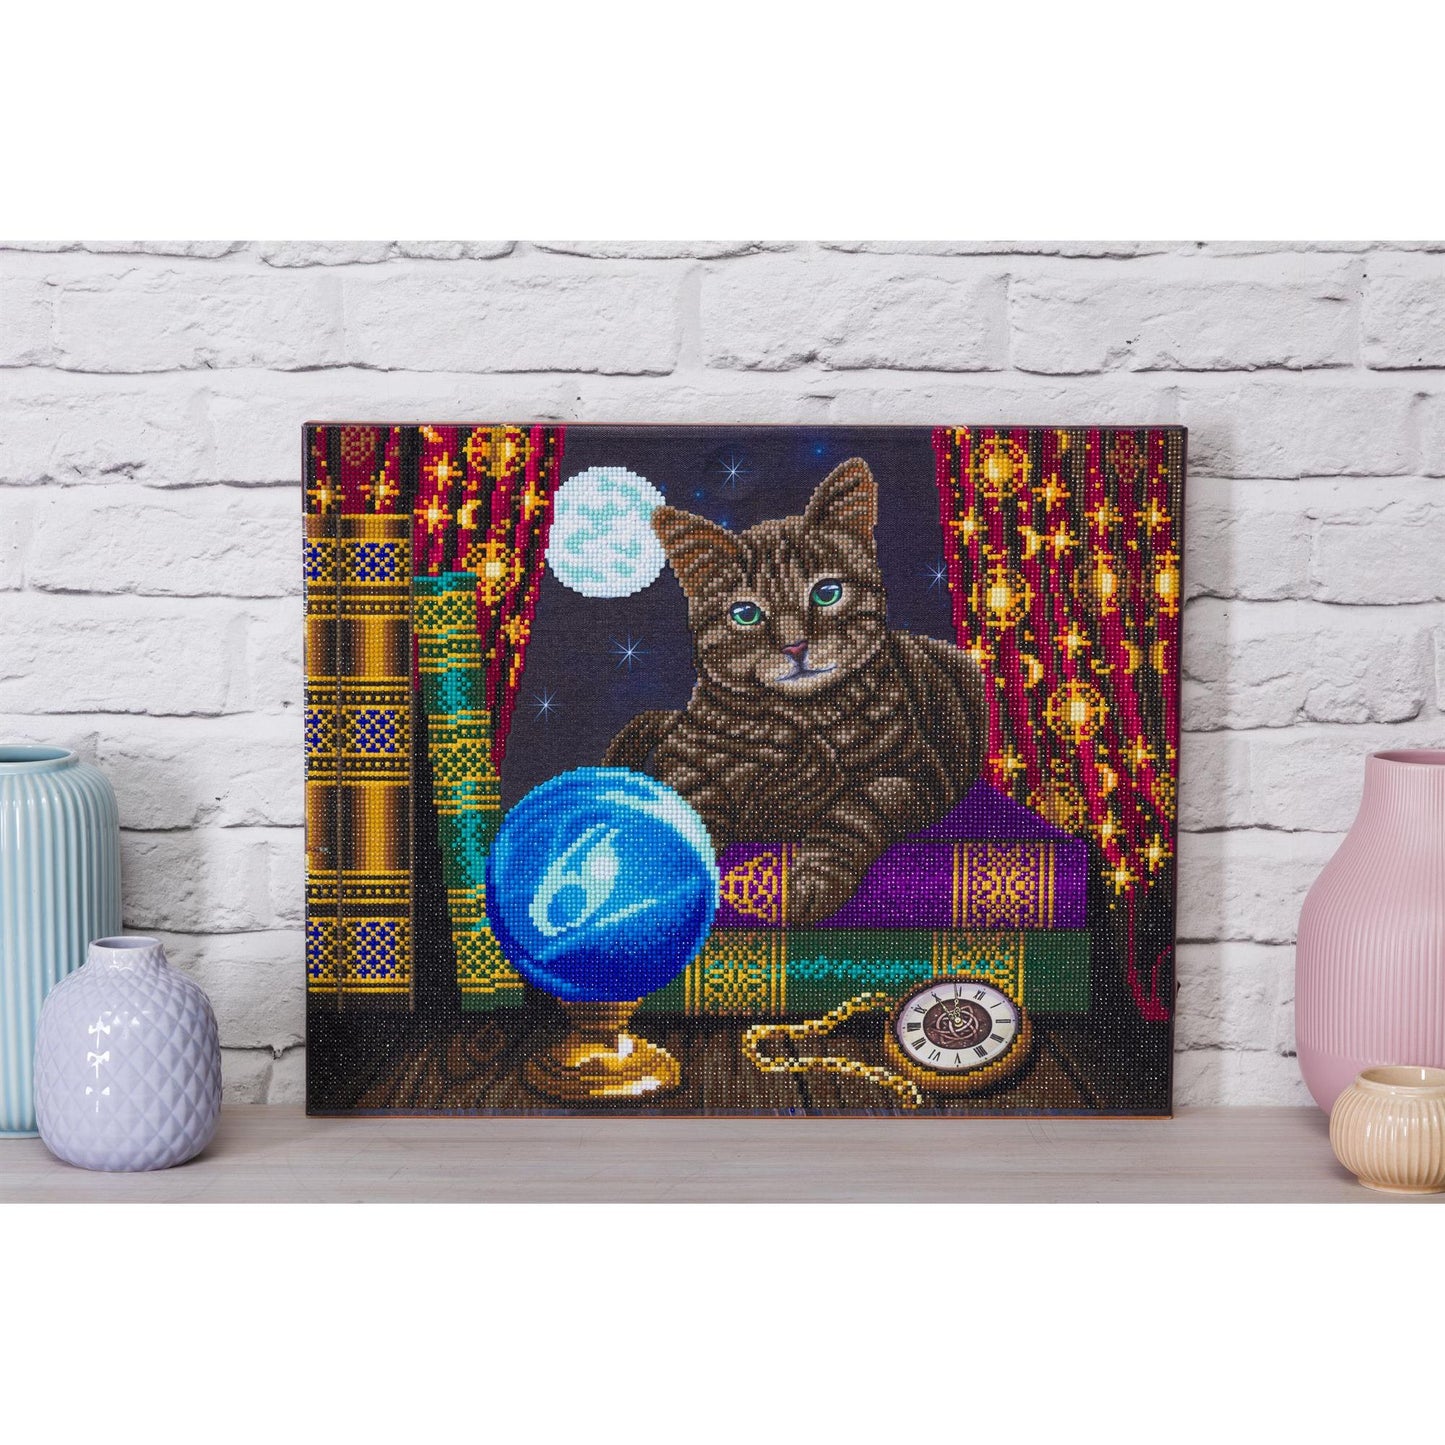 Craft Buddy 40cm x 50cm Crystal Art Kit with LED Lights - The Fortune Teller Cat